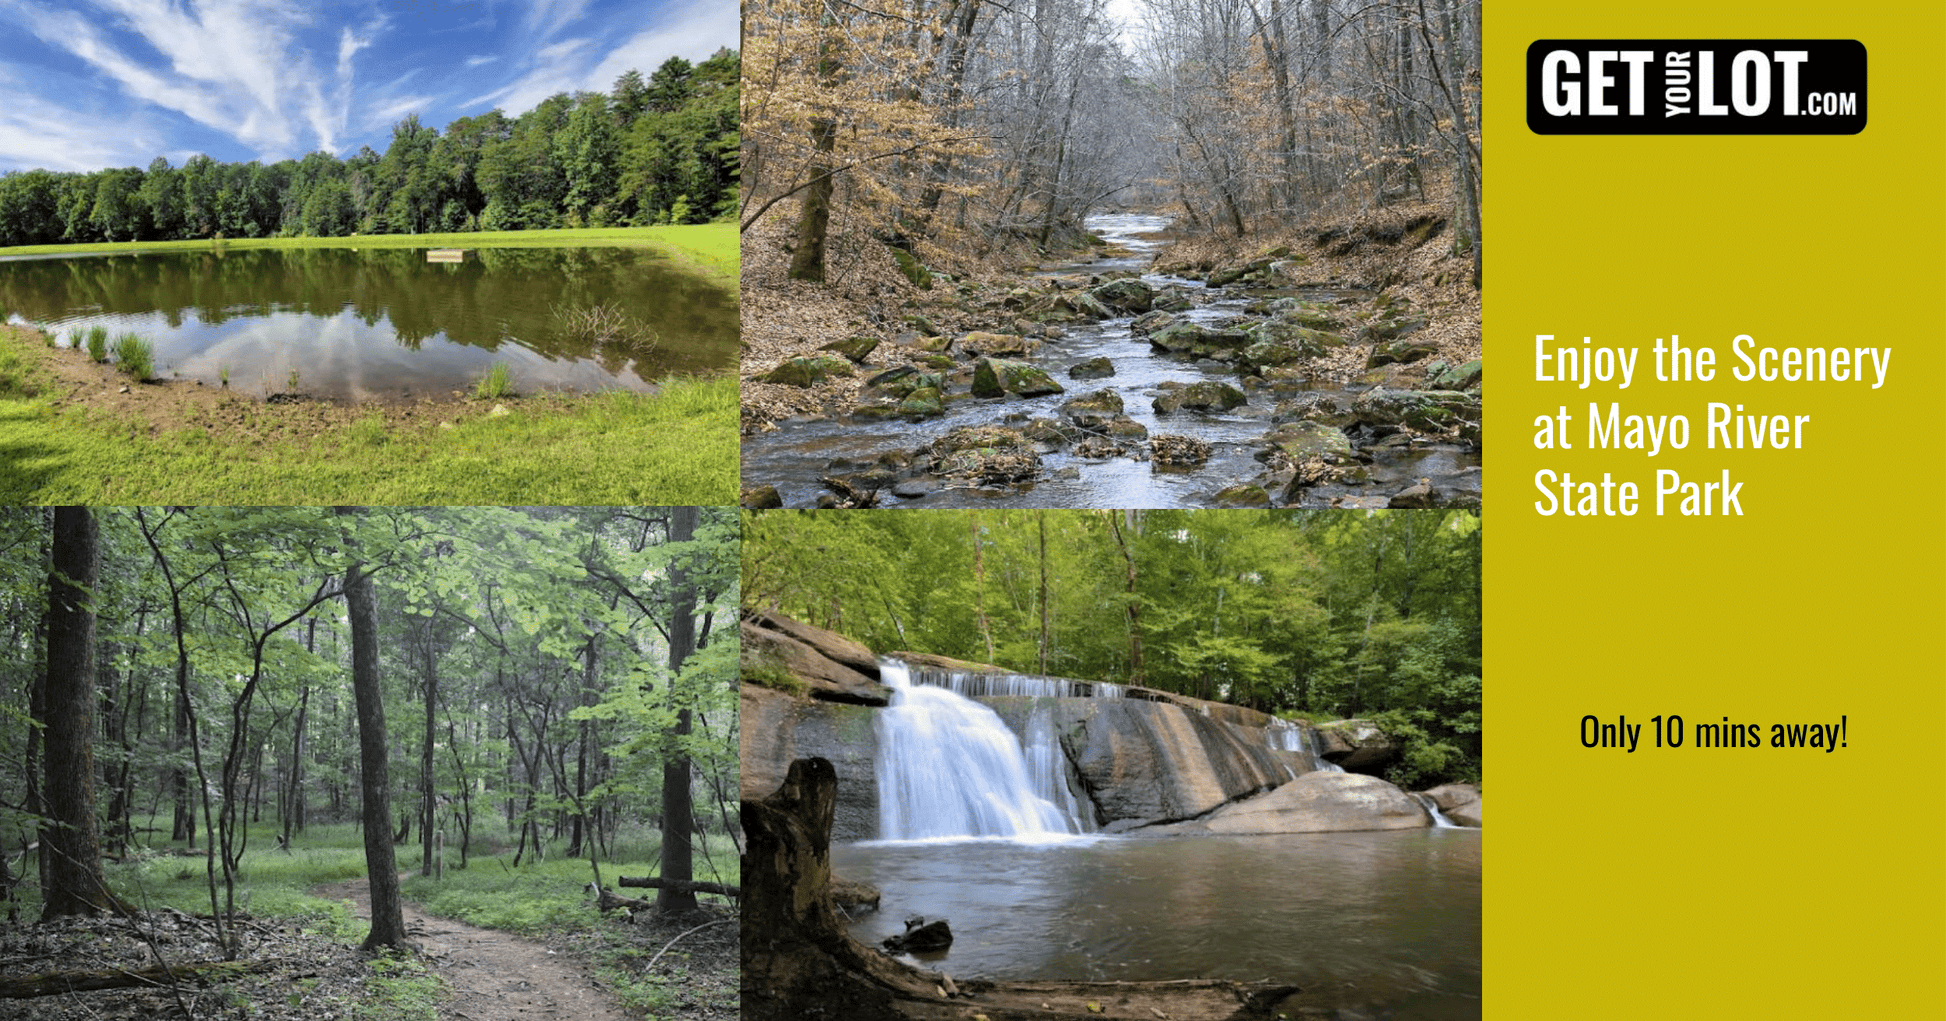 Enjoy the Scenery at Mayo River State Park